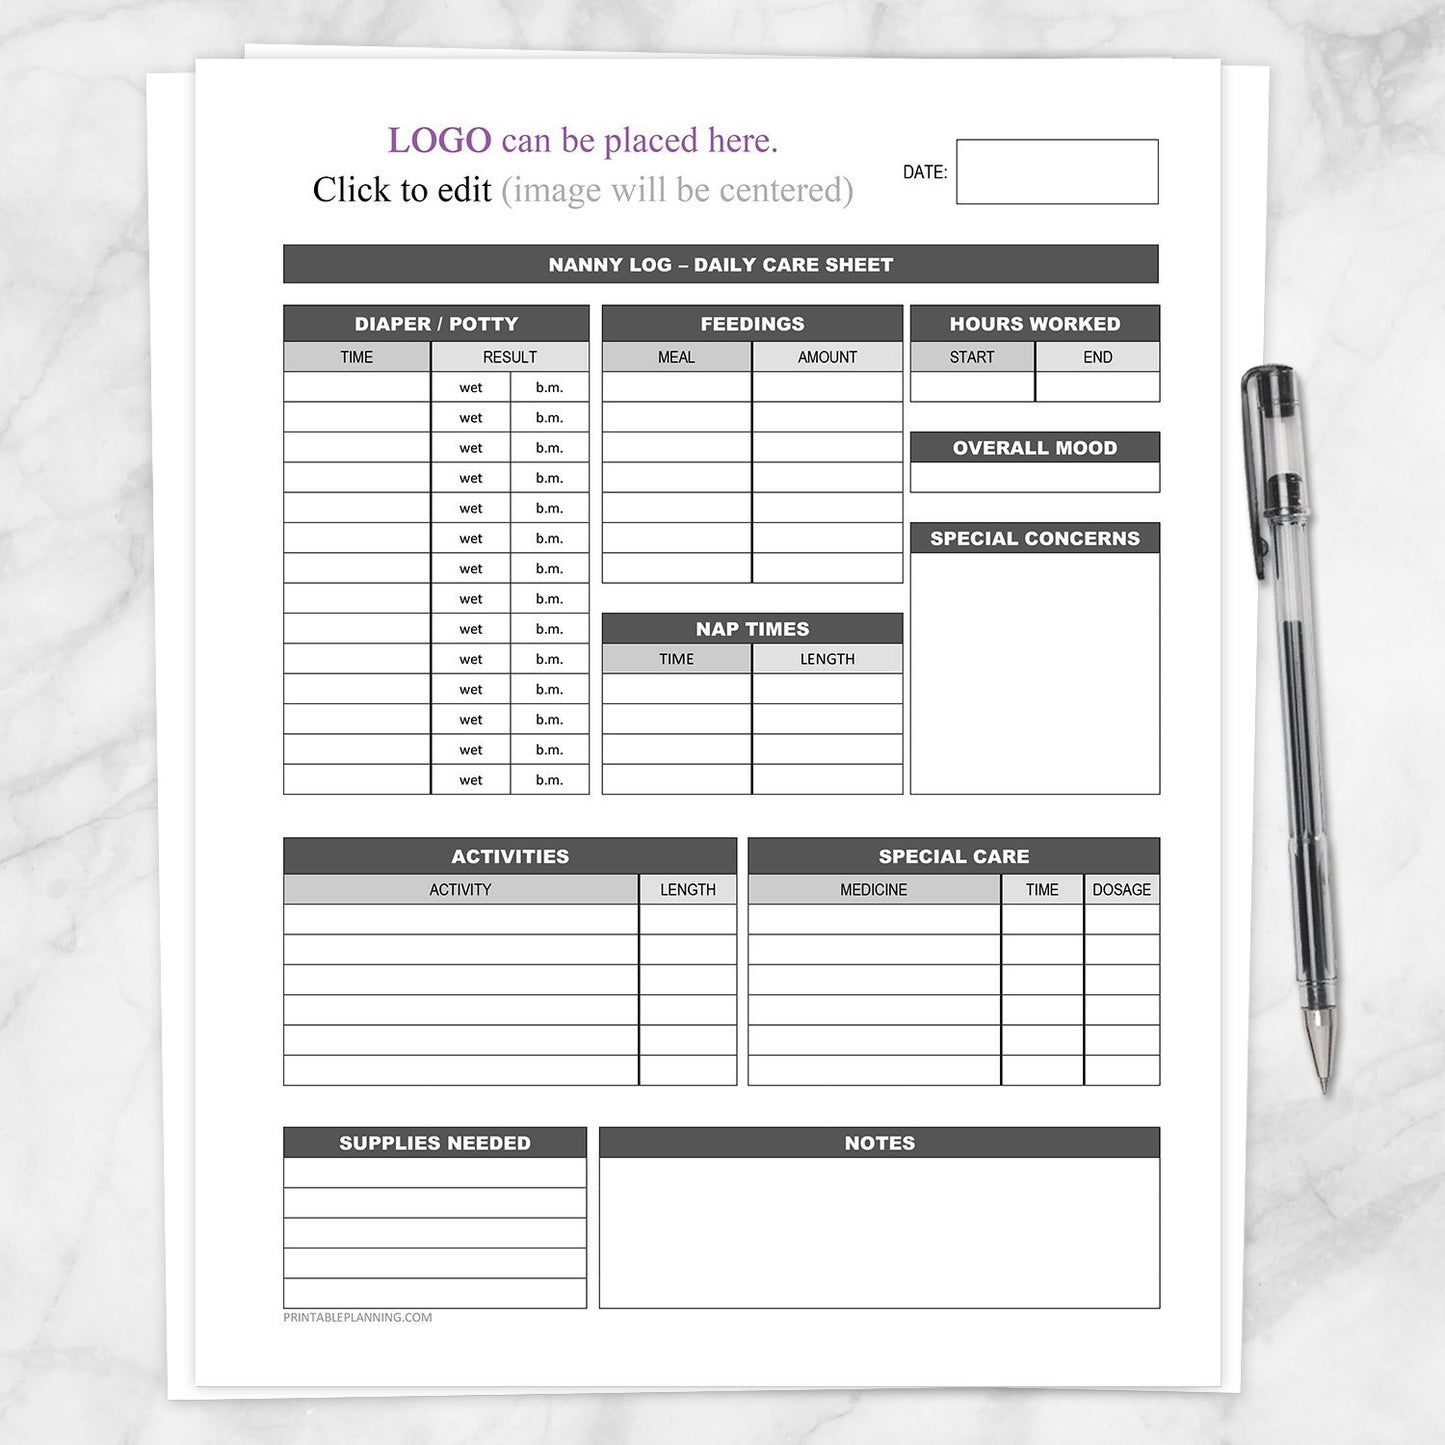 Printable Nanny Log with Your Logo - Daily Infant and Child Care Sheet at Printable Planning